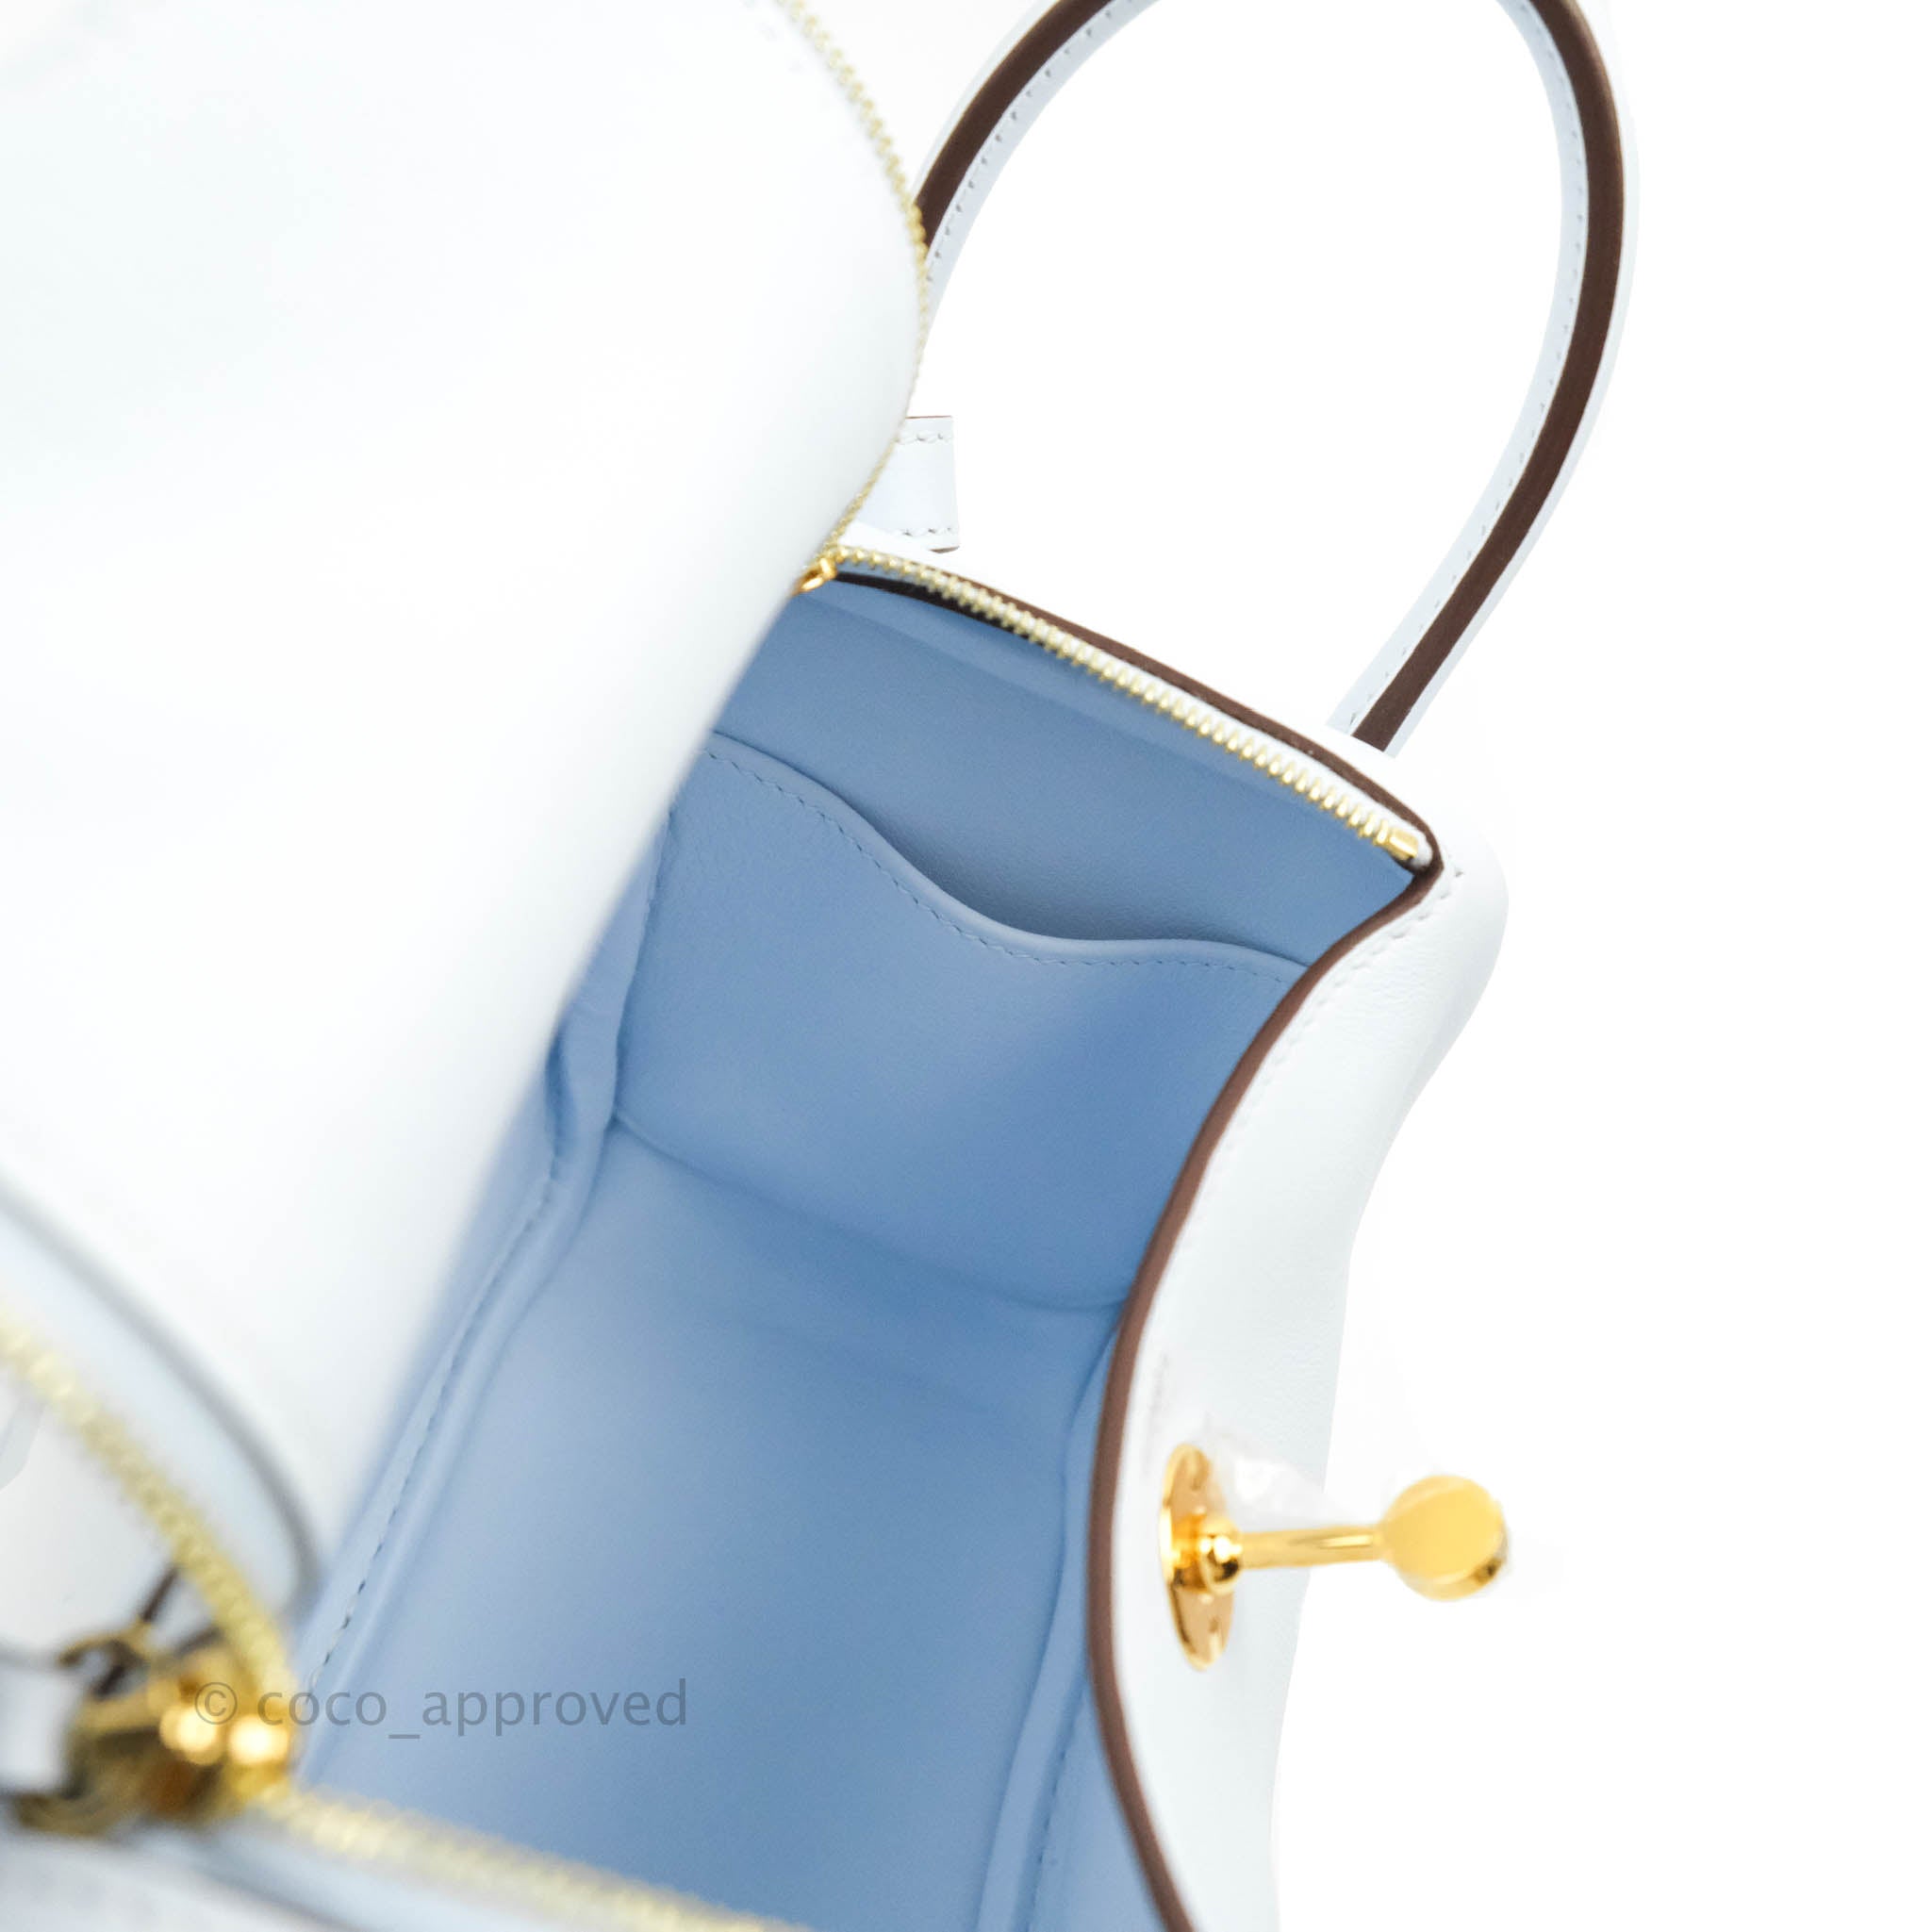 Hermès Mini Lindy 20 In White Swift With Gold Hardware